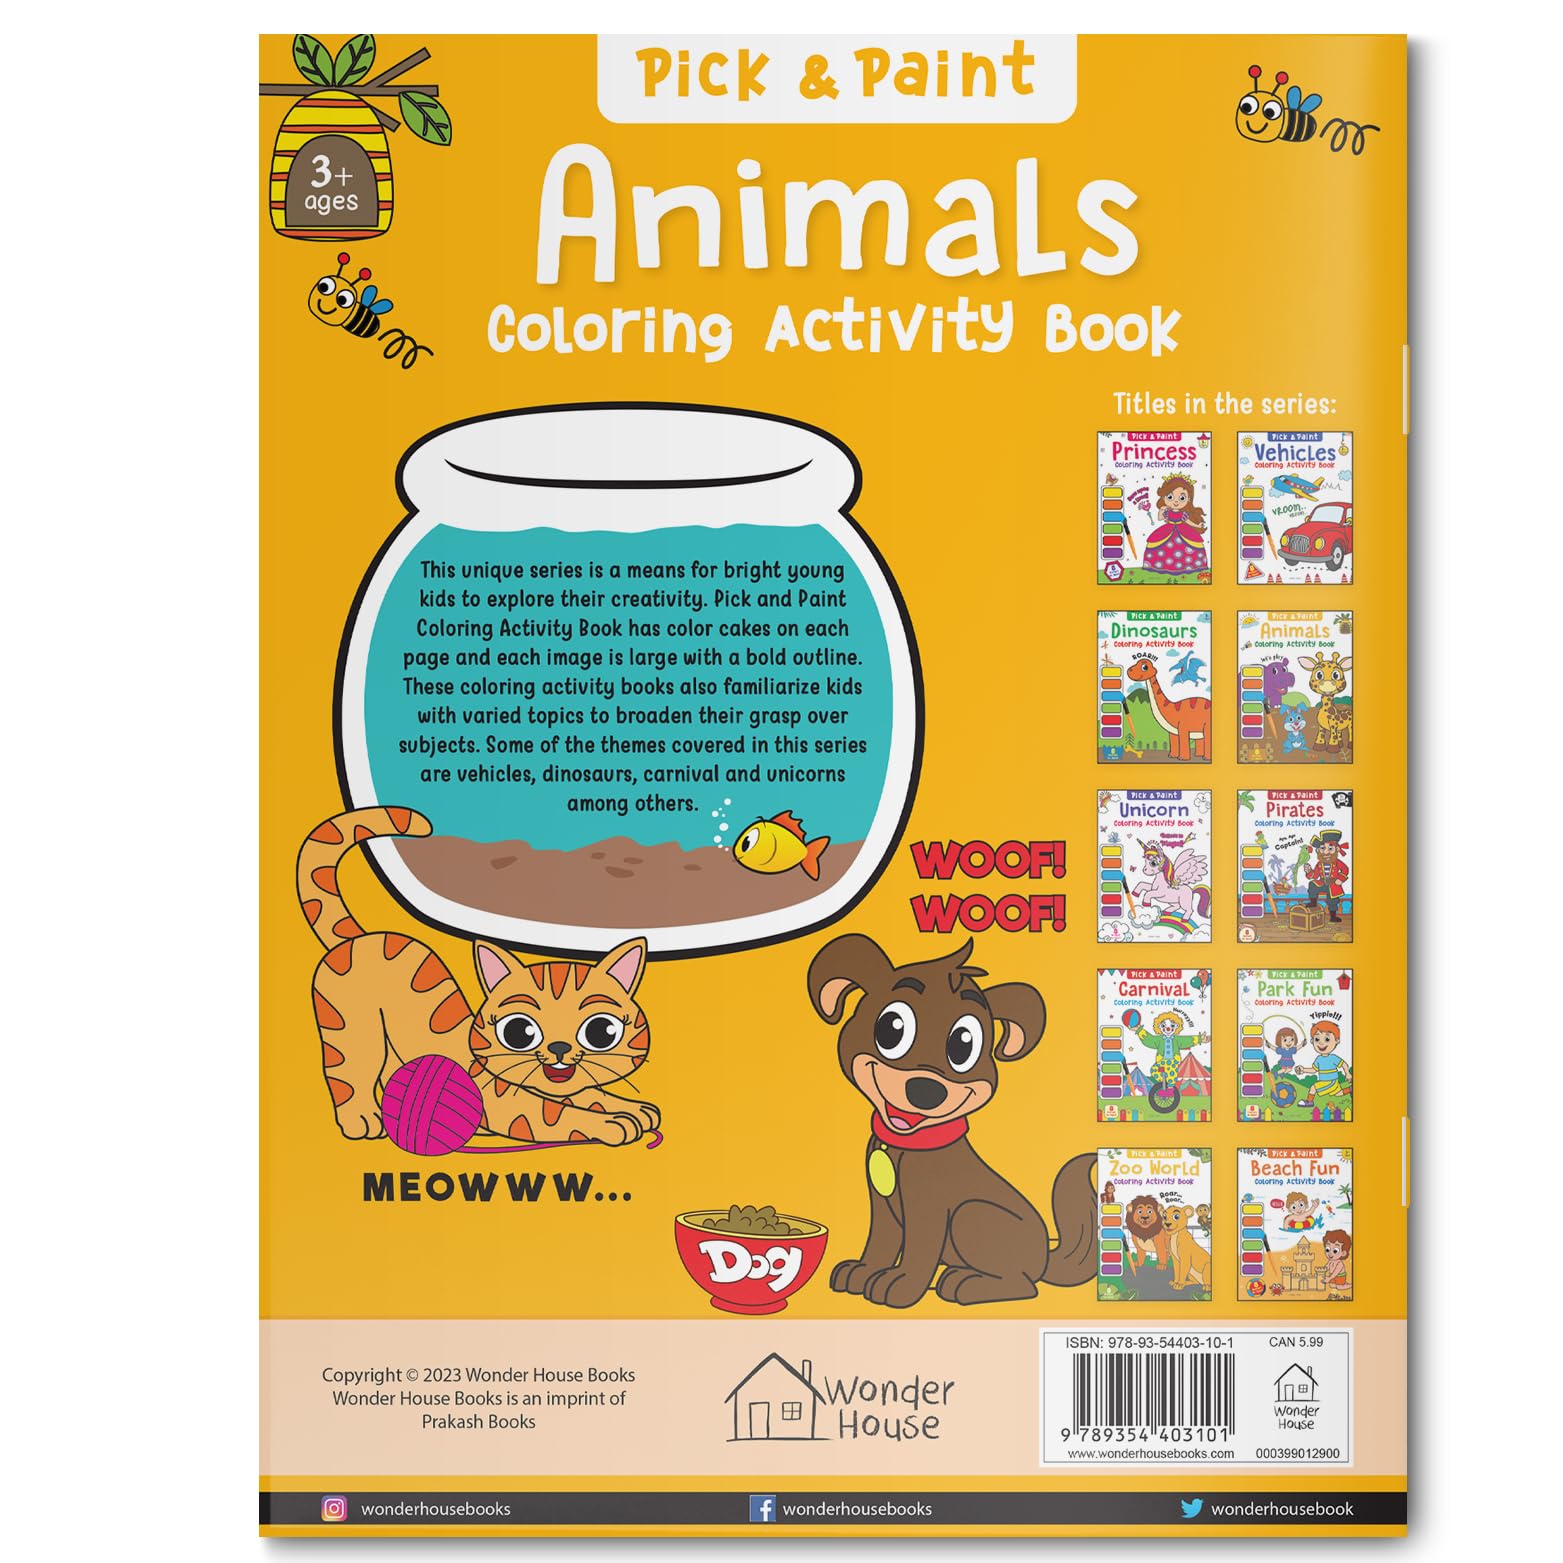 Animals: Pick and Paint Coloring Activity Book